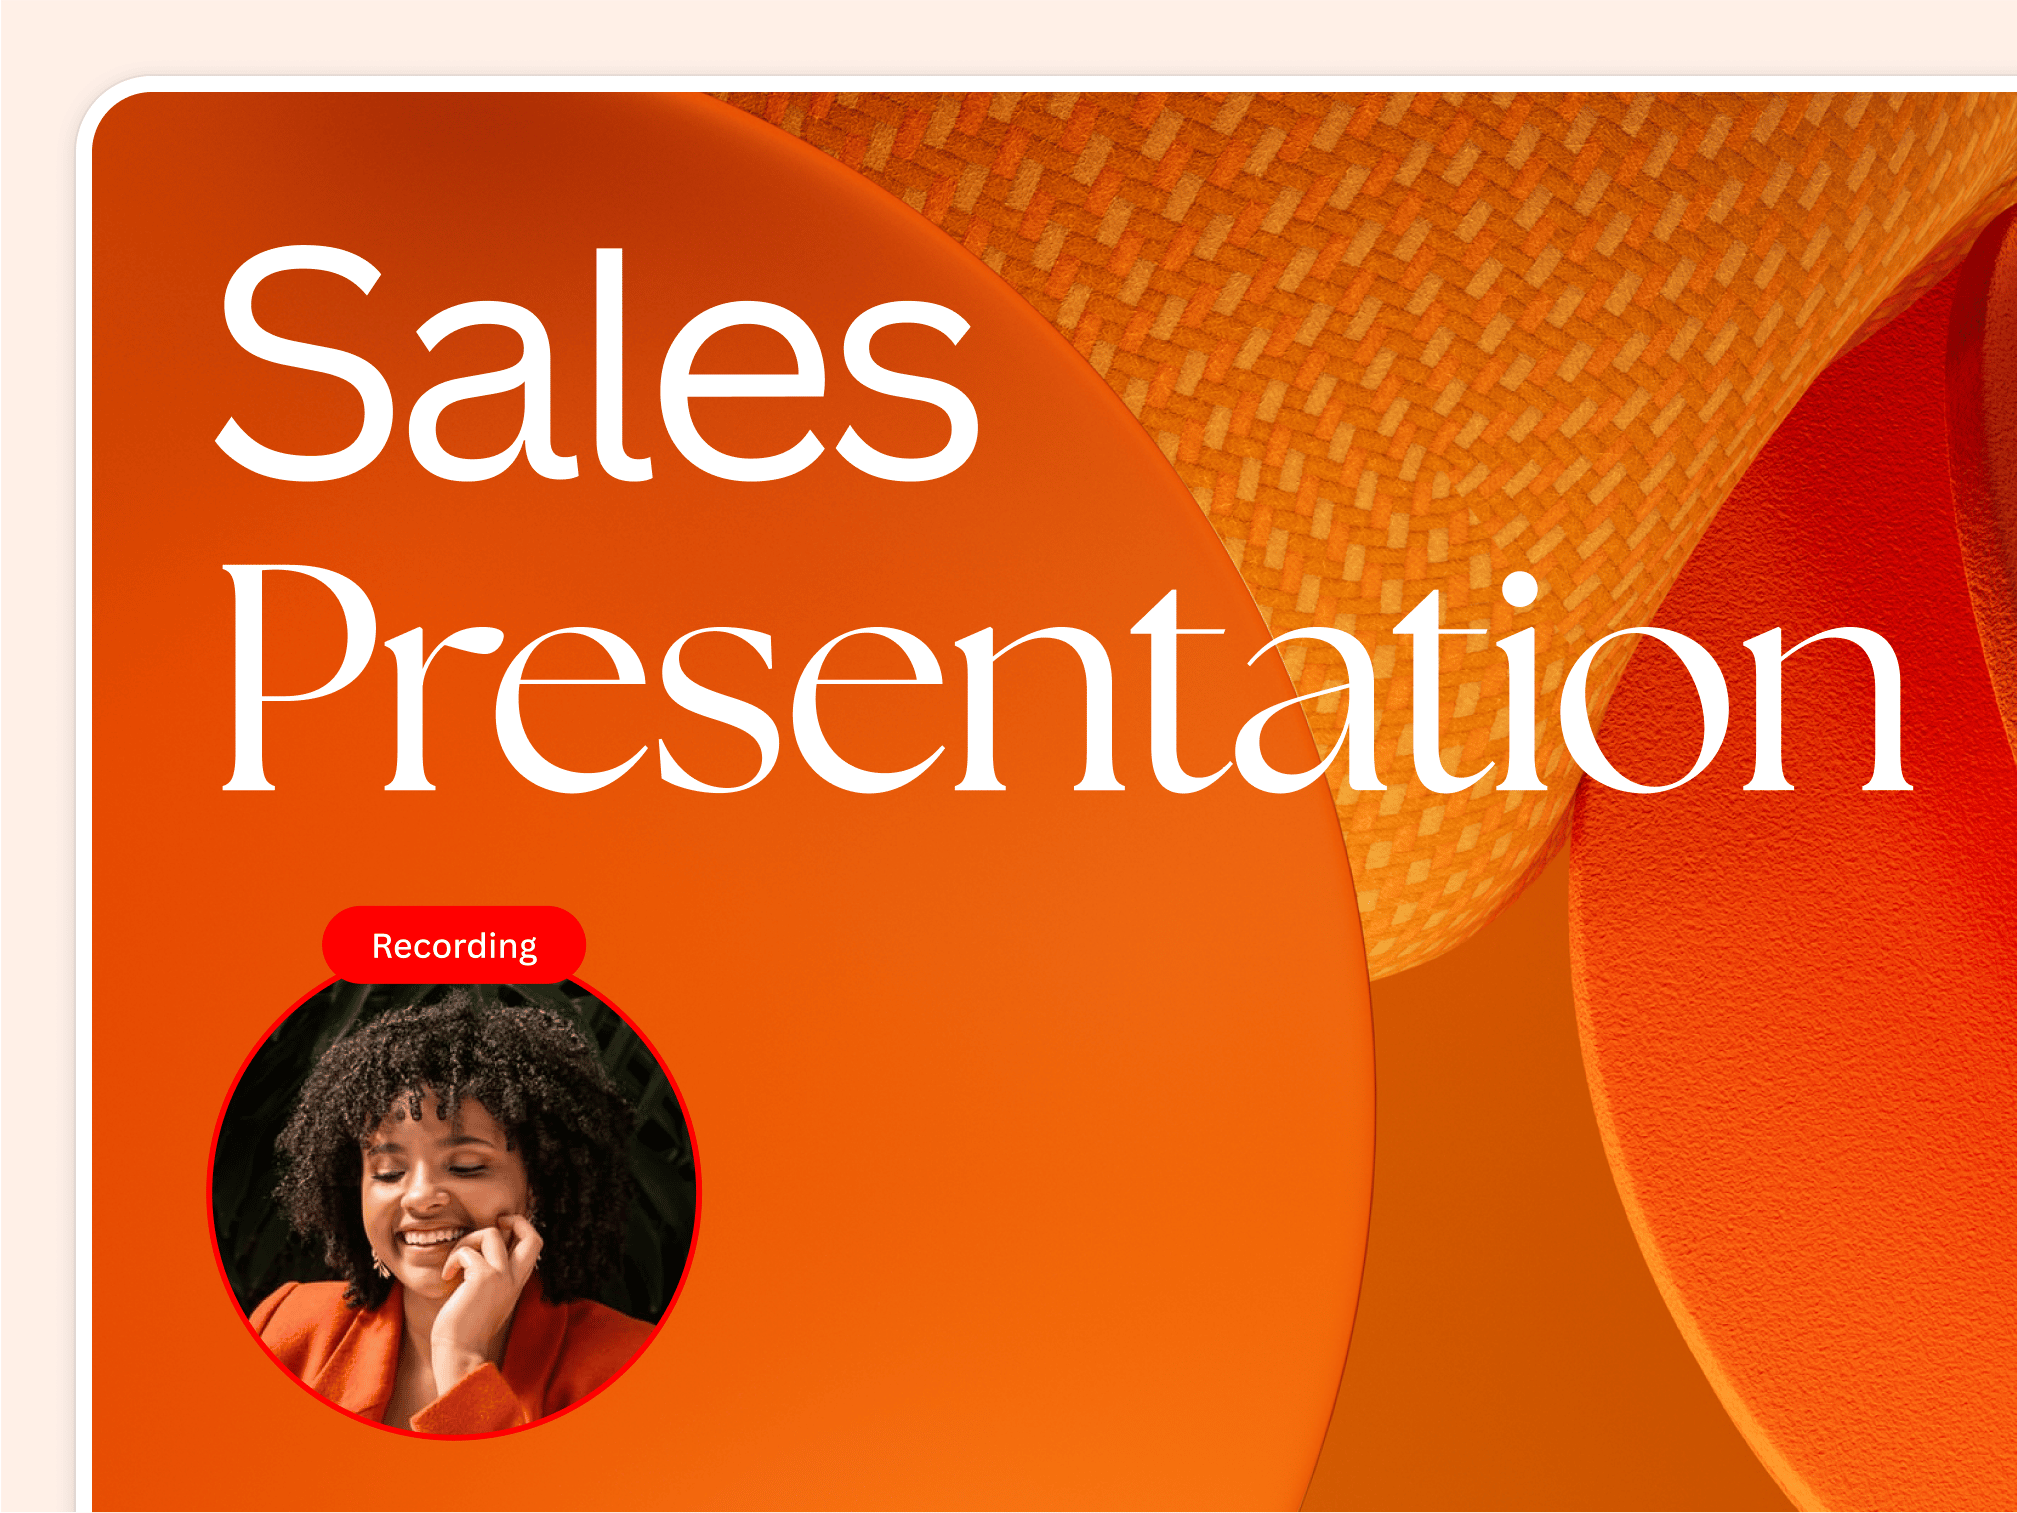 Slide into Summer Savings: Elevate Your Presentations with Slideograph!